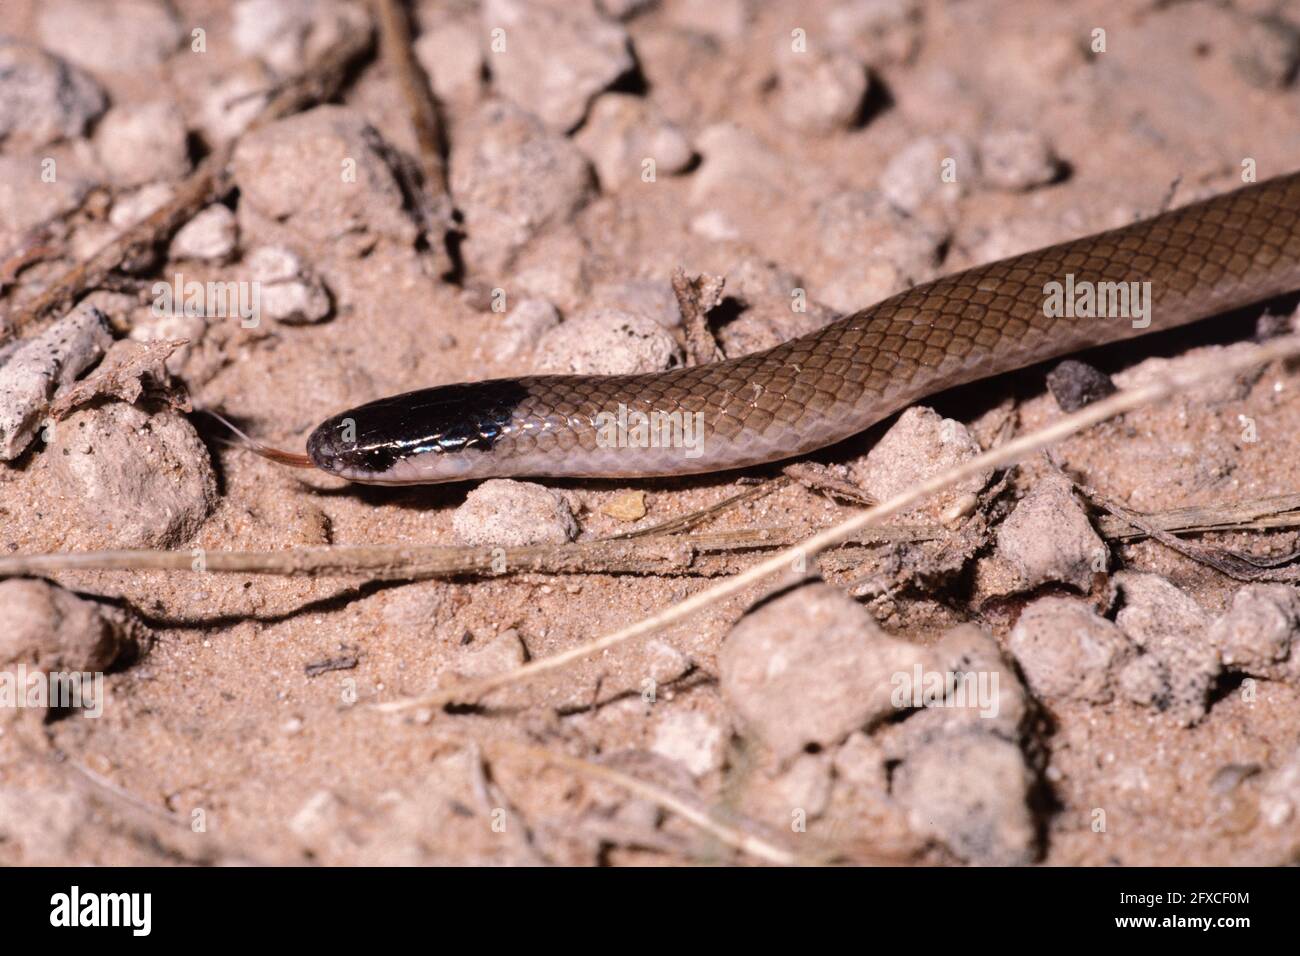 The Plains Black-headed Snake is a small, harmless snake usually found in rocky or grassy plains in the southwestern U.S. Stock Photo